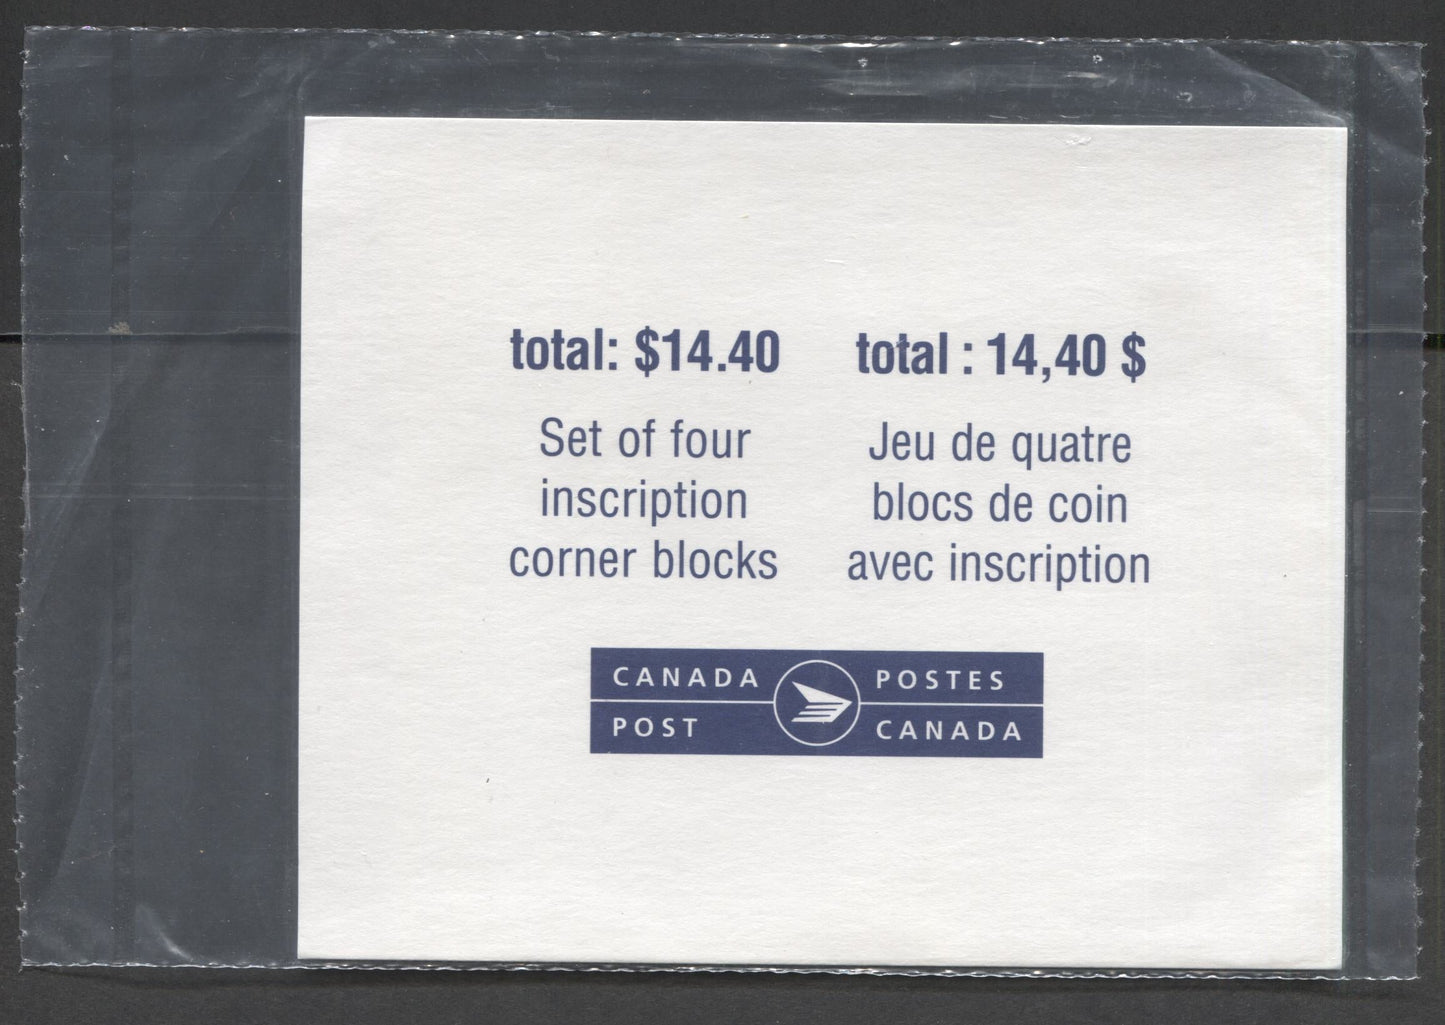 Lot 332 Canada #1754 90c Multicolored (Silver) The Farmer's Family 1998 Masterpieces of Canadian Art, Canada Post Sealed Pack of Inscription Blocks on TRC Paper With HB Type 7A Insert Card, VFNH, Unitrade Cat. $36